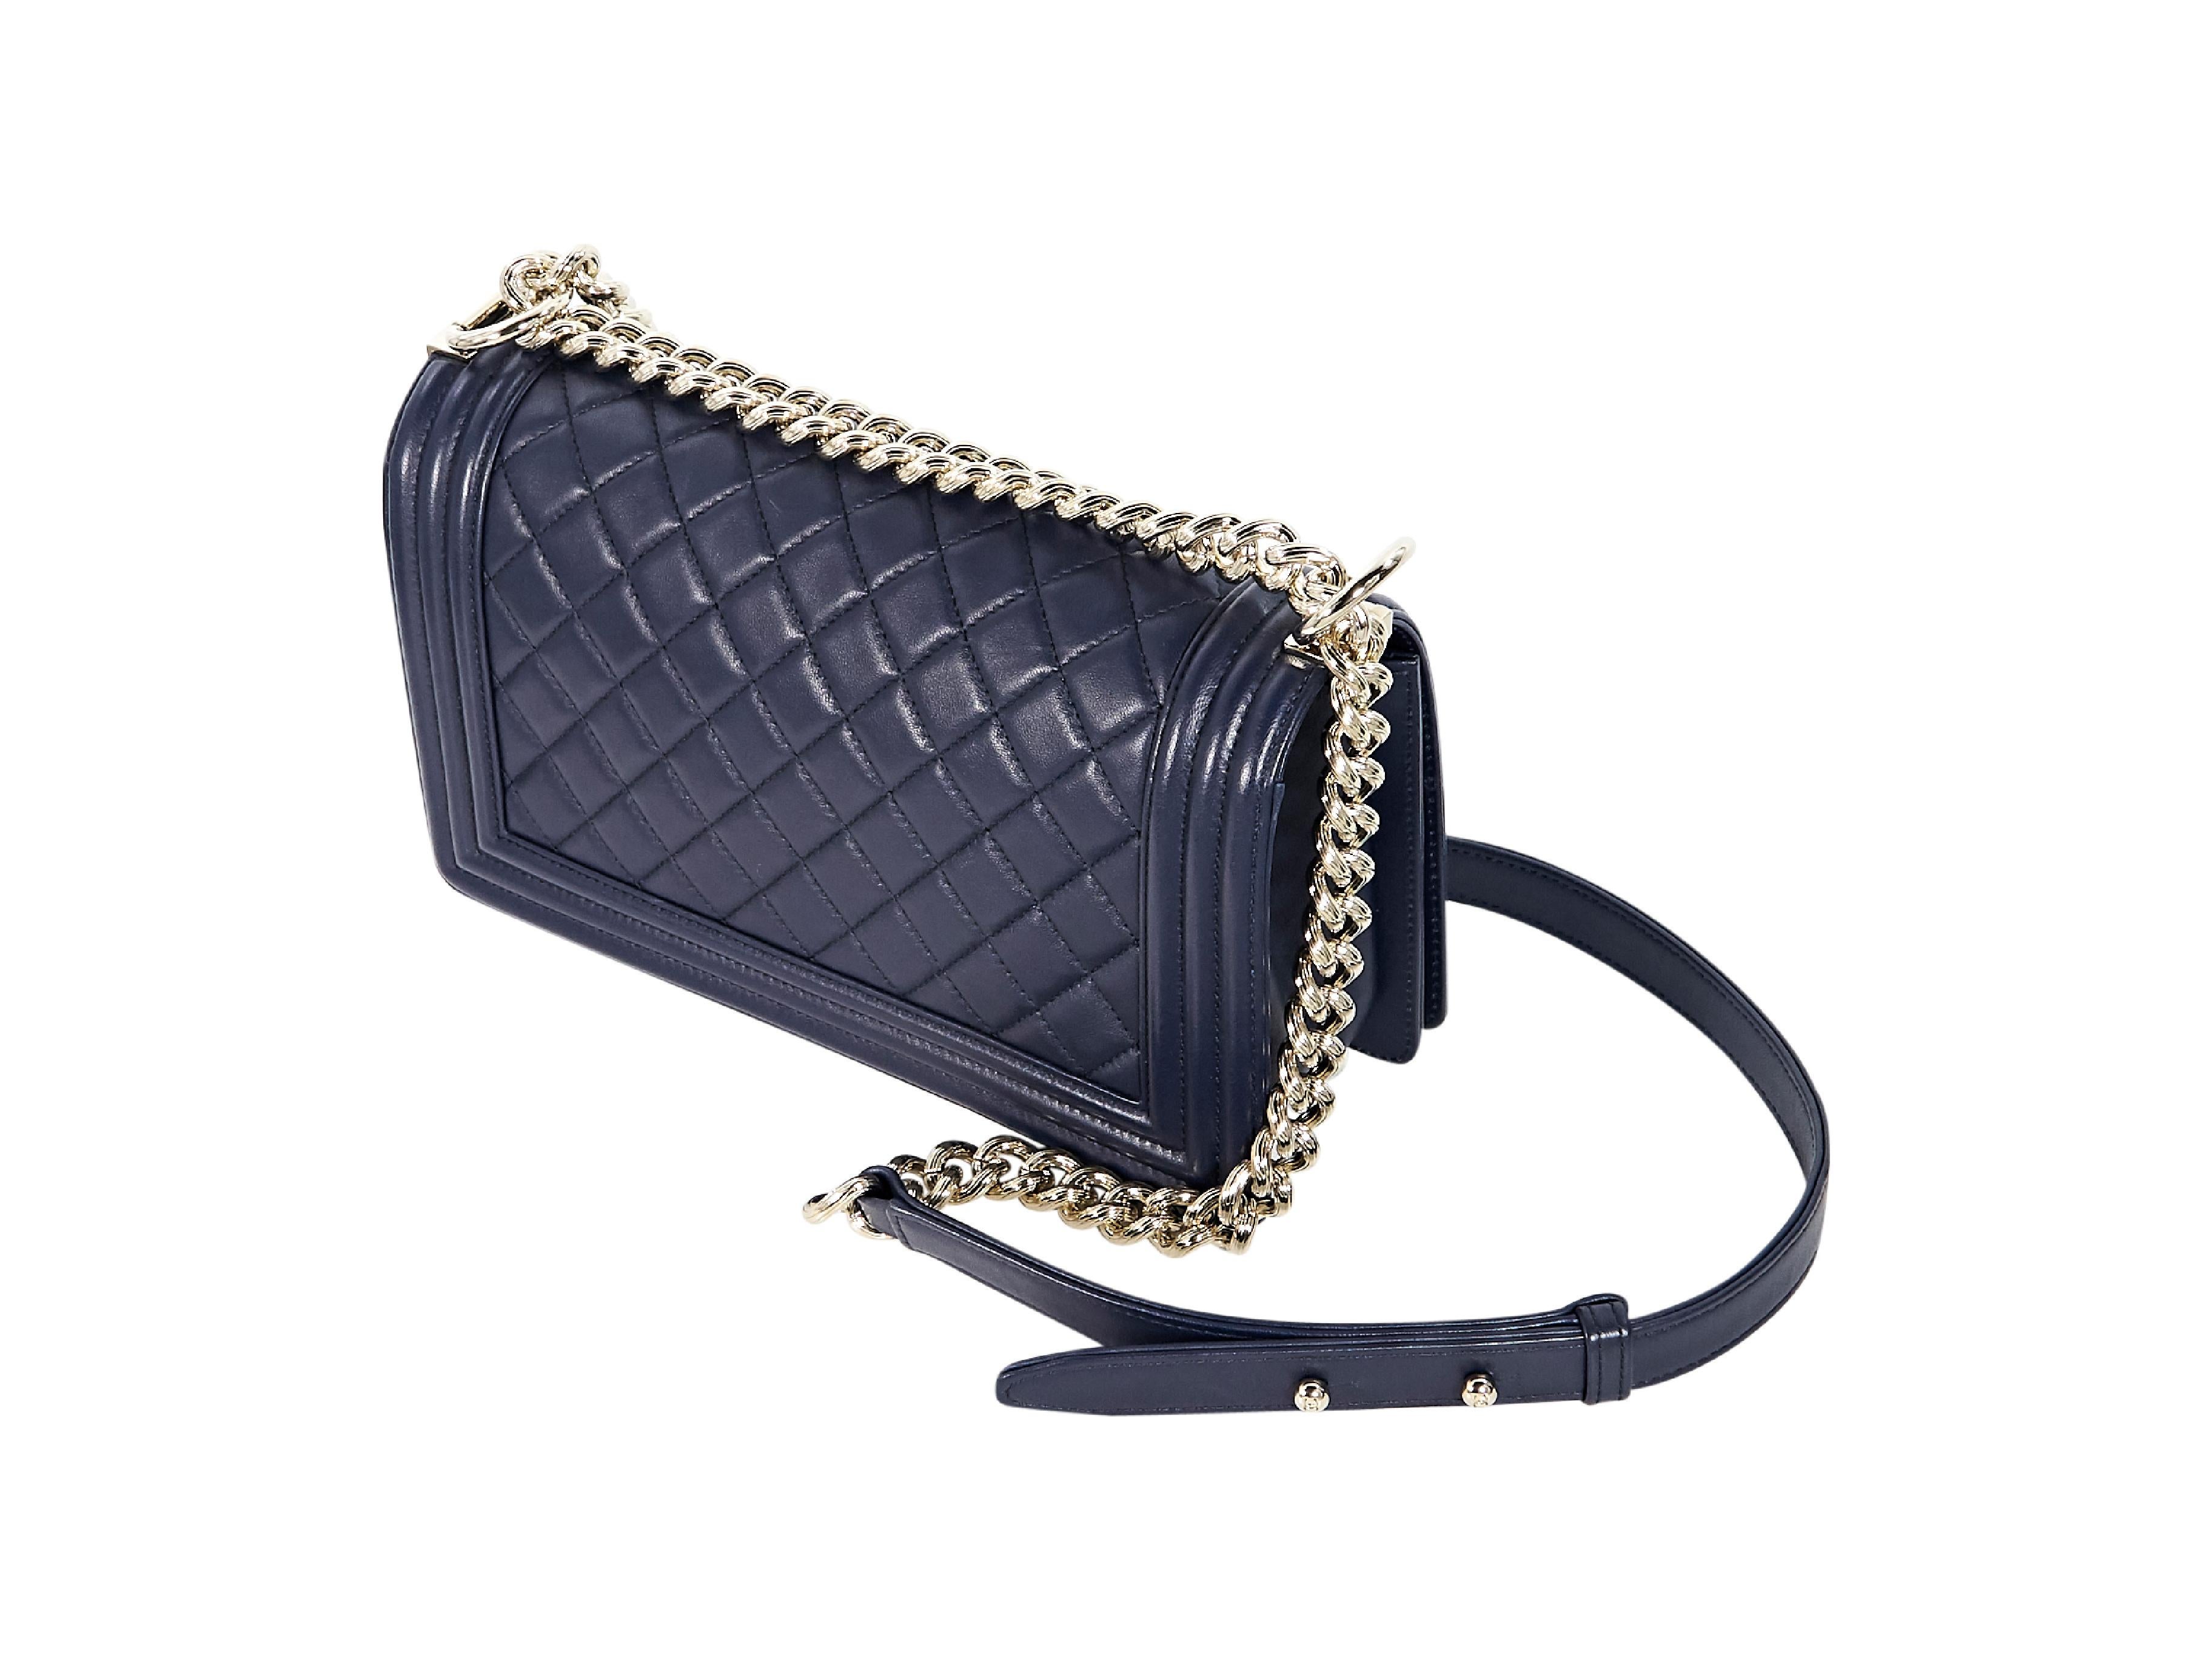 Product details:  Navy blue quilted leather Boy shoulder bag by Chanel.  Adjustable leather and chain shoulder strap.  Front flap with concealed closure.  Lined interior with inner slide pocket.  Goldtone hardware.  Authenticity card included.  10